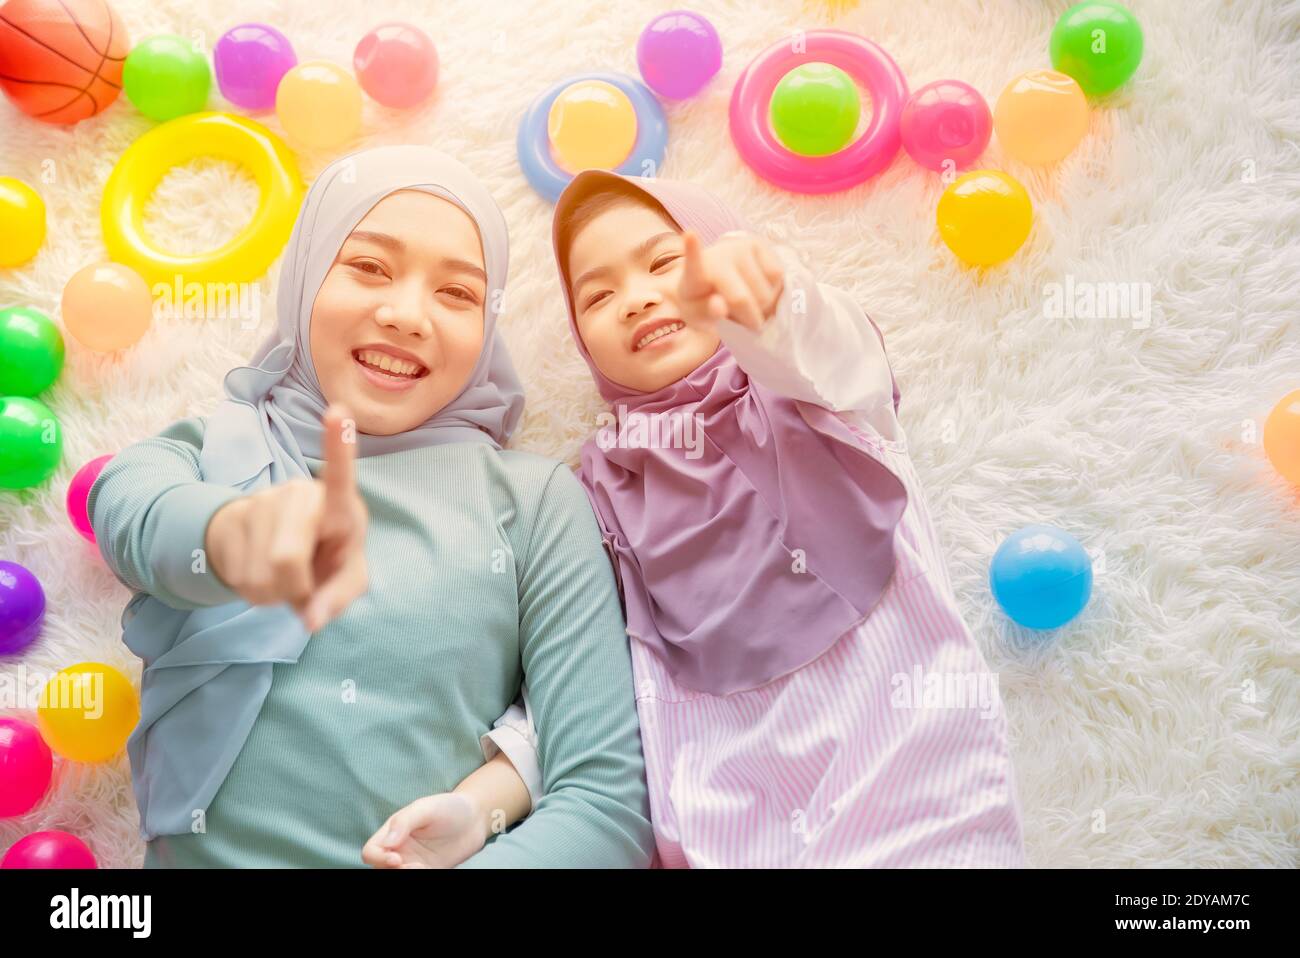 Cute Muslim Arab mother and her girl child happy playing together with colorful balls fun and lovely Stock Photo